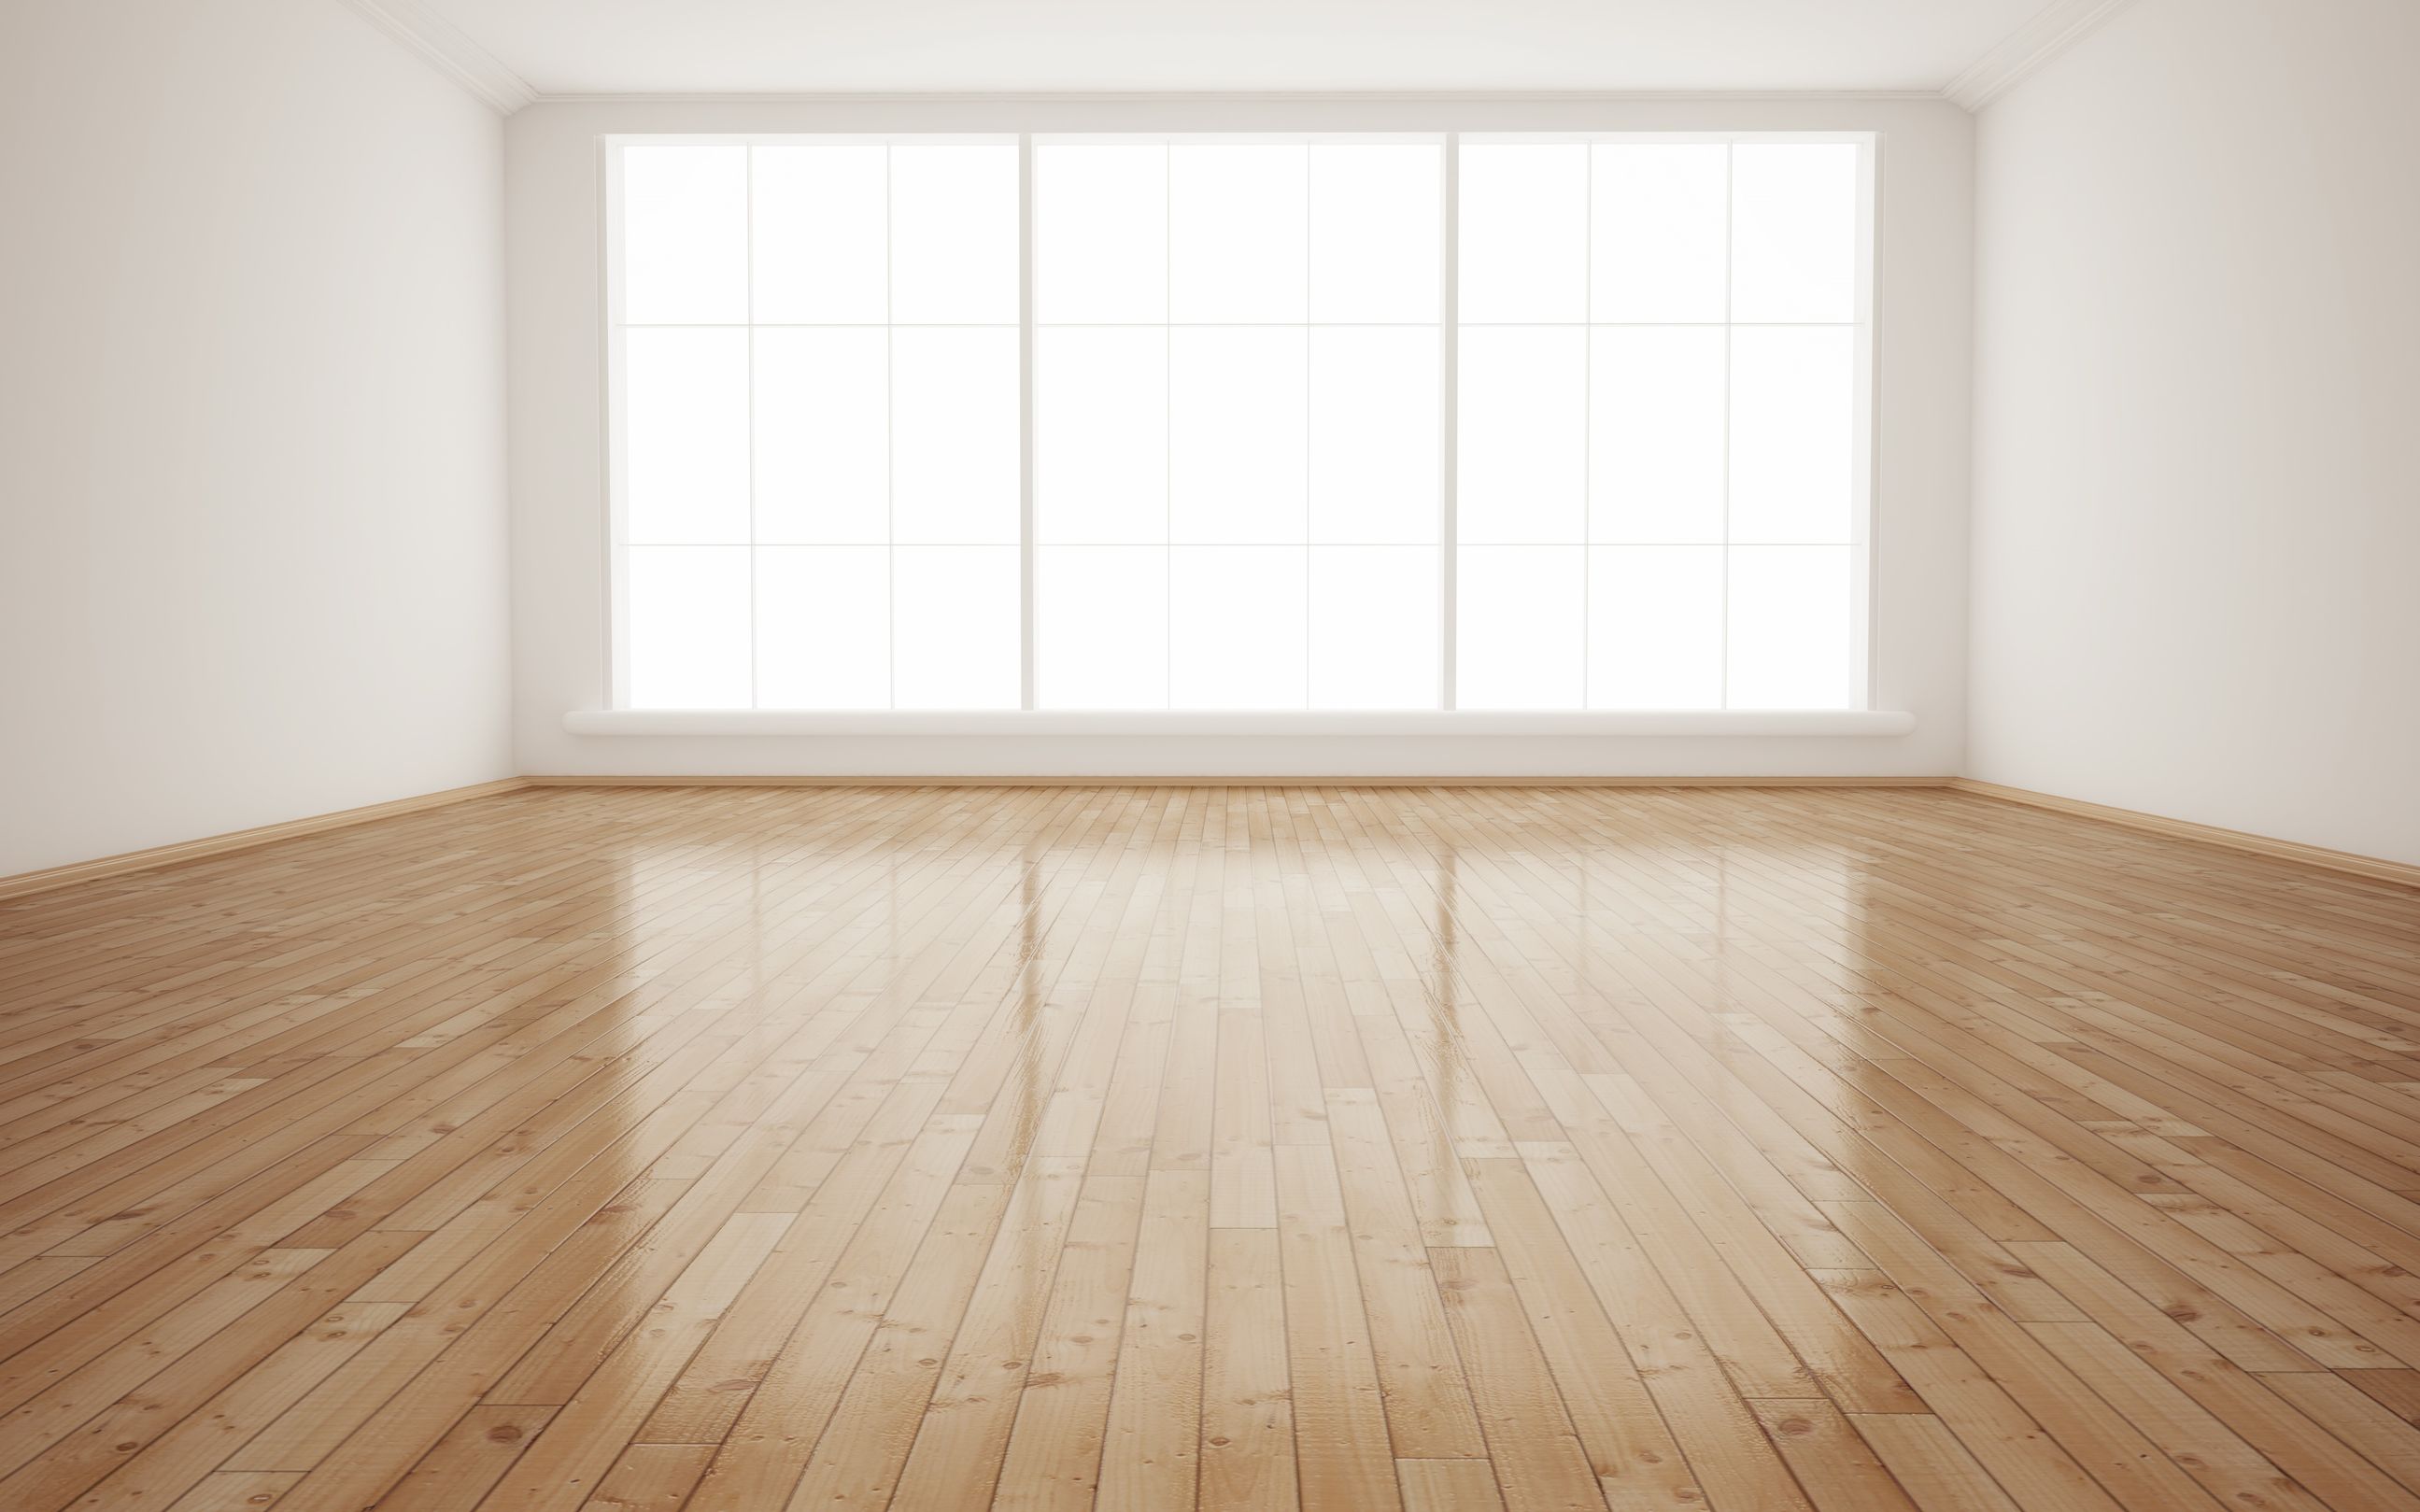 Empty Room With Bare Concrete Wall And Wood Floor 3d